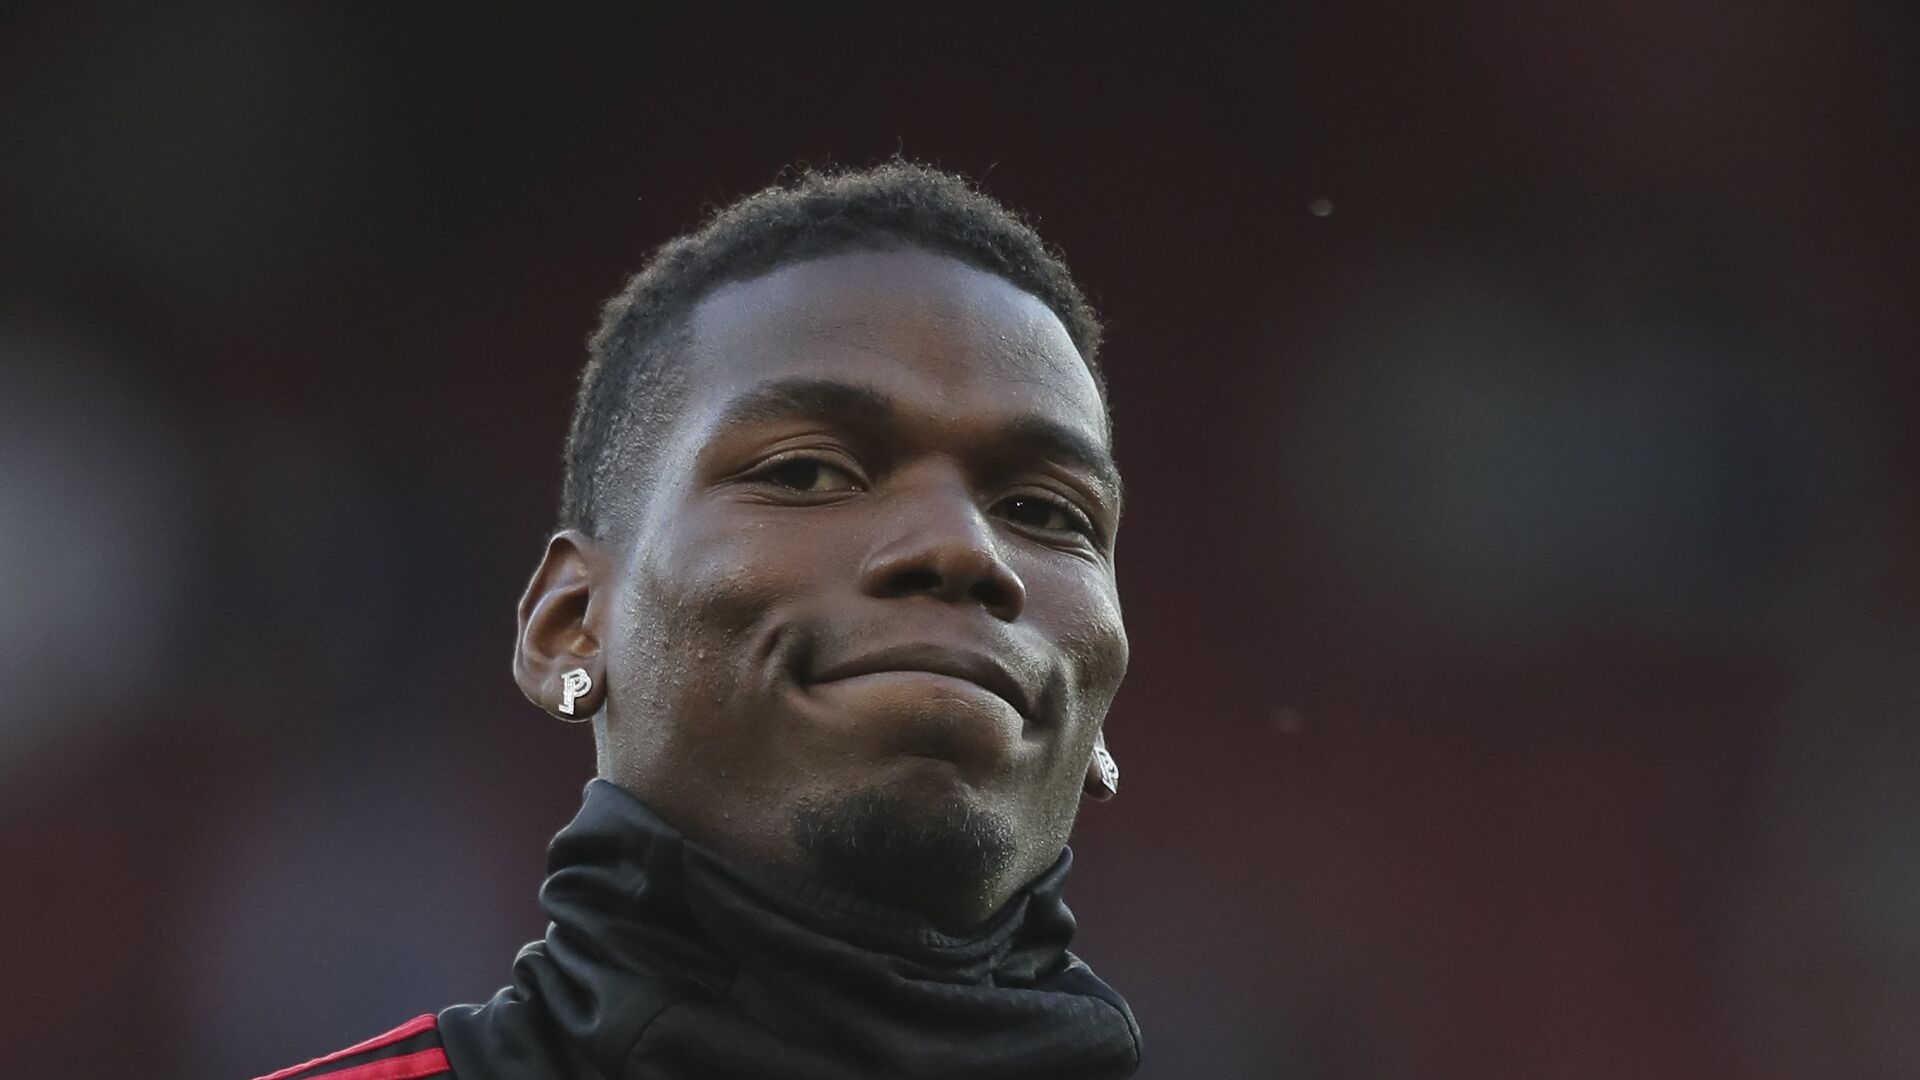 Manchester United's Paul Pogba applauds the fans as he takes part in the warm up prior to the start of the English Premier League soccer match between Manchester United and Leicester City at Old Trafford, in Manchester, England, Friday, Aug. 10, 2018 - اسپوتنیک افغانستان  , 1920, 17.03.2022